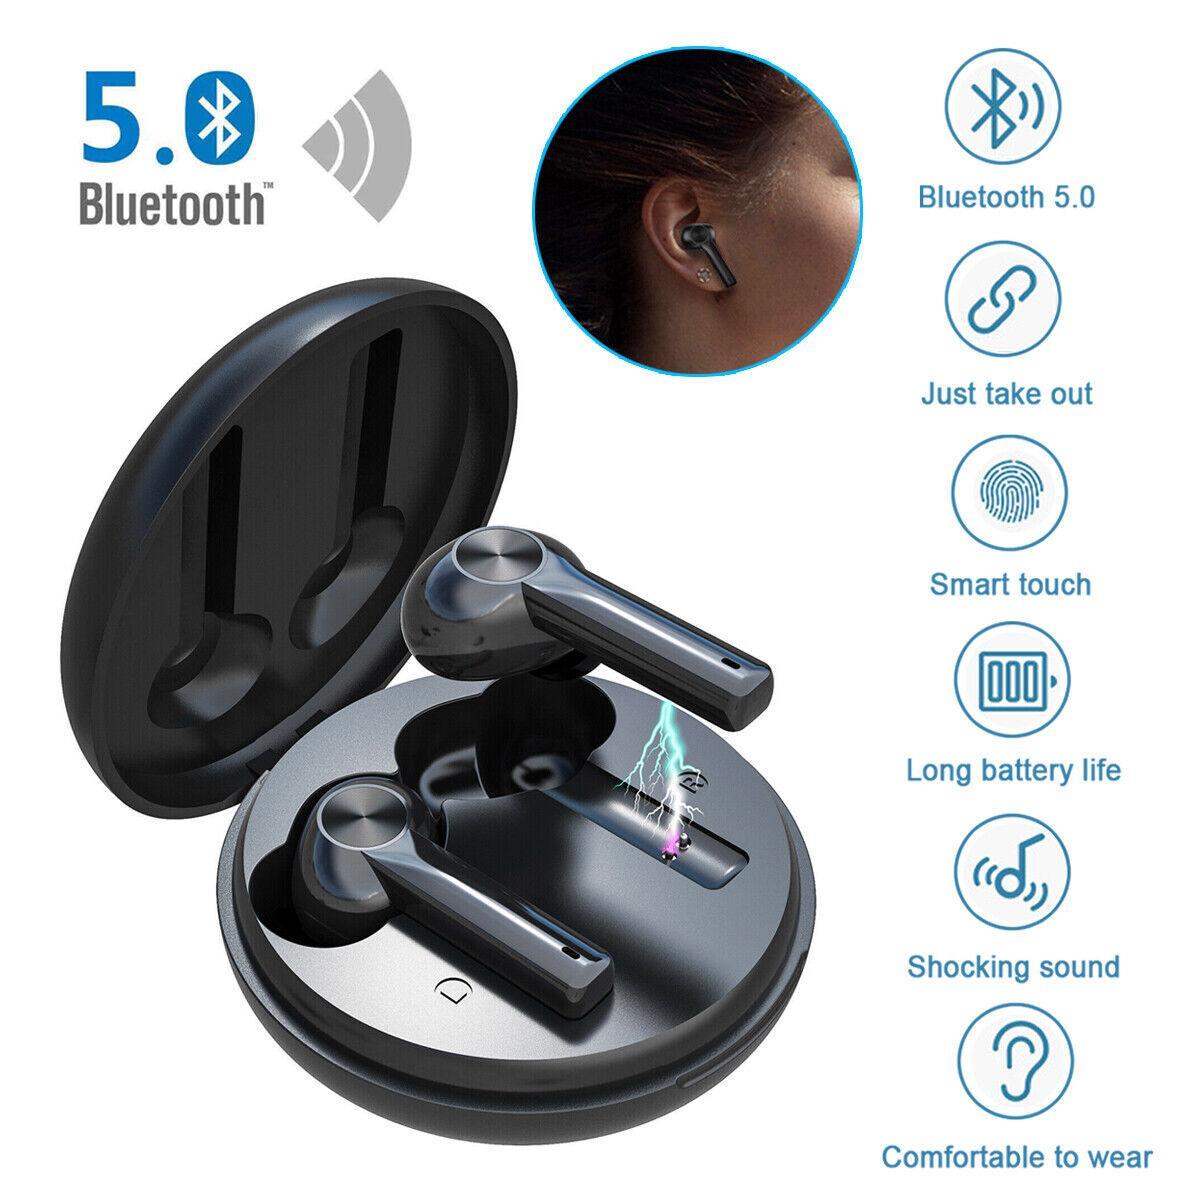 Bluetooth 5.0 Earbuds For iphone Samsung Android Wireless Headphone Waterproof